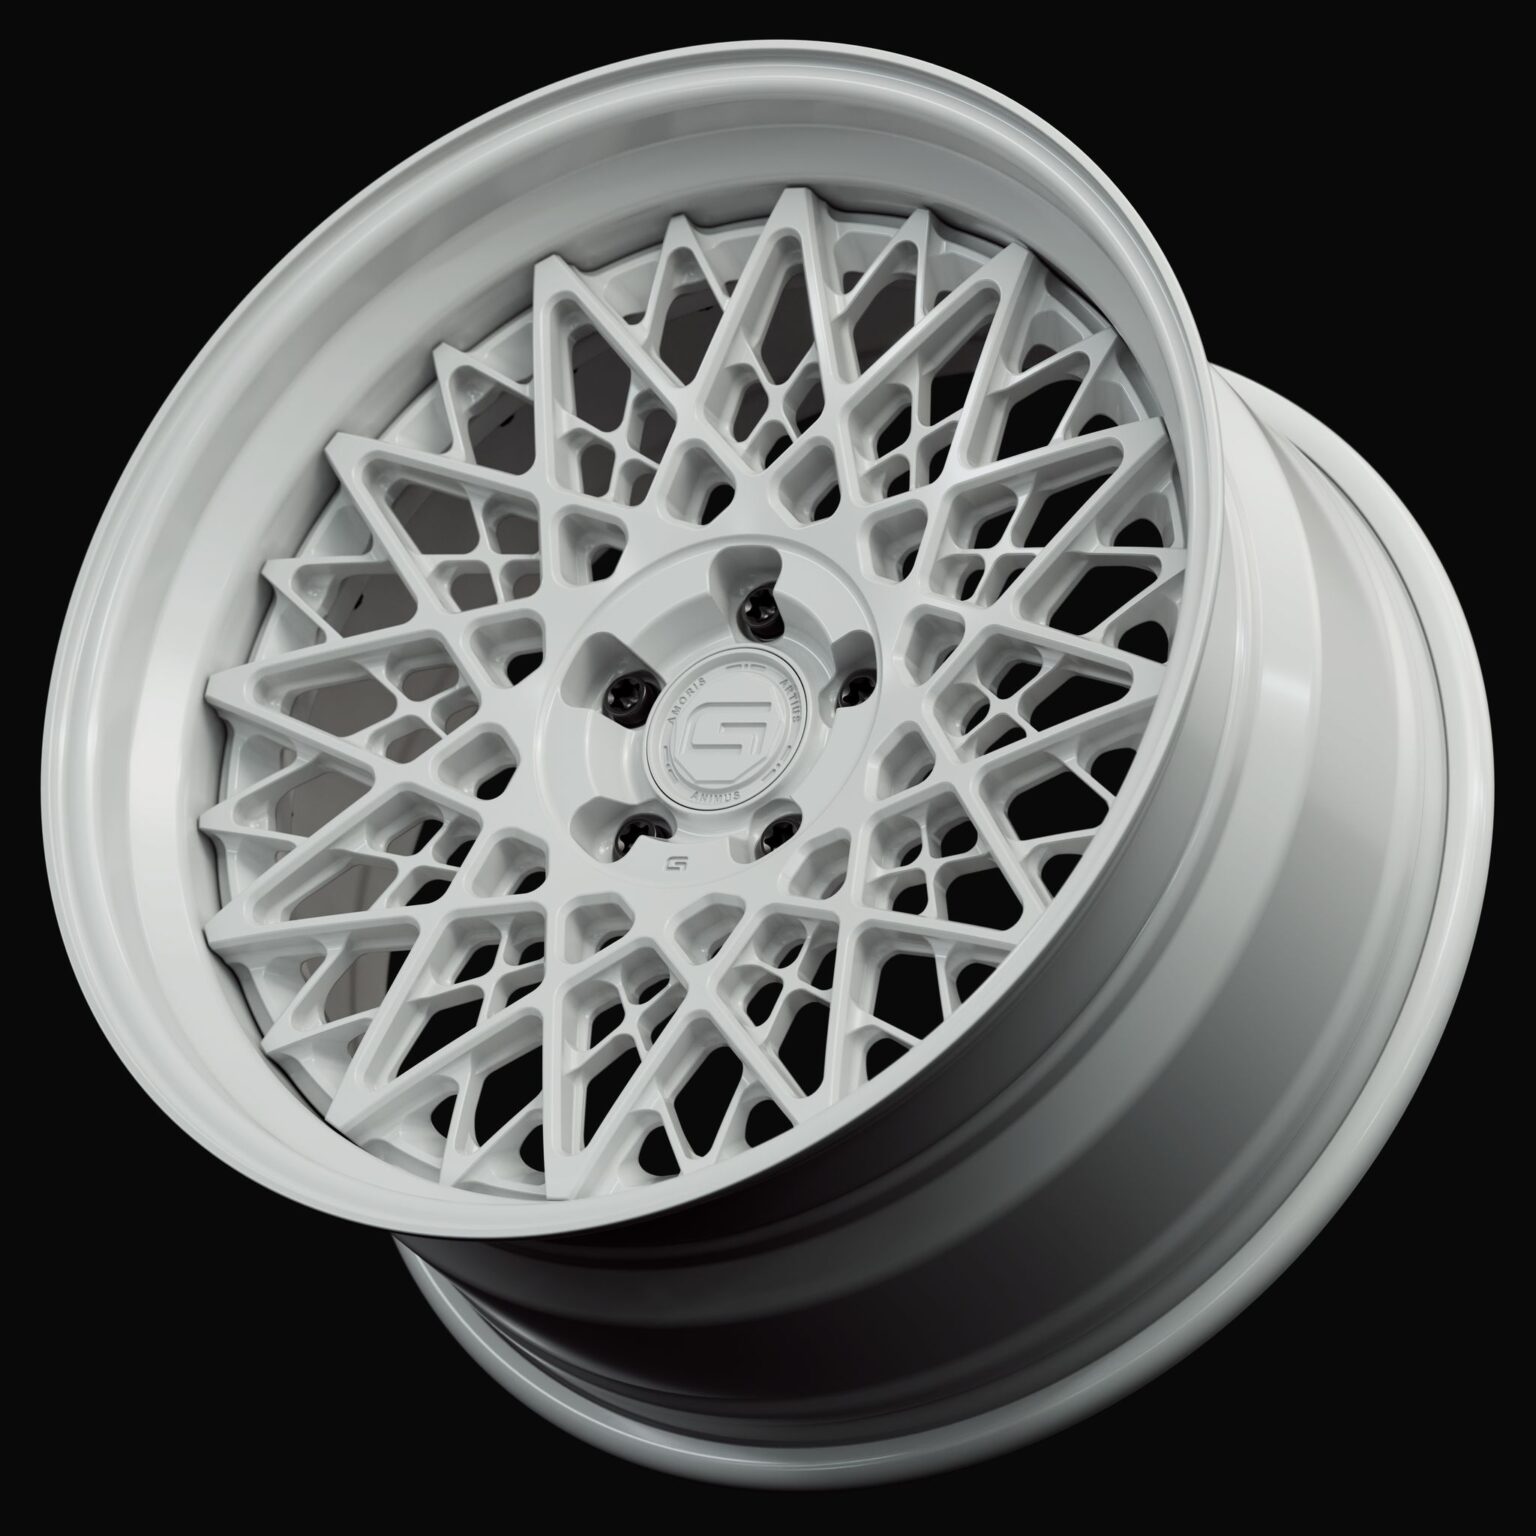 Three-quarter view of a white G28 3-piece wheel from Govad Forged Heritage series